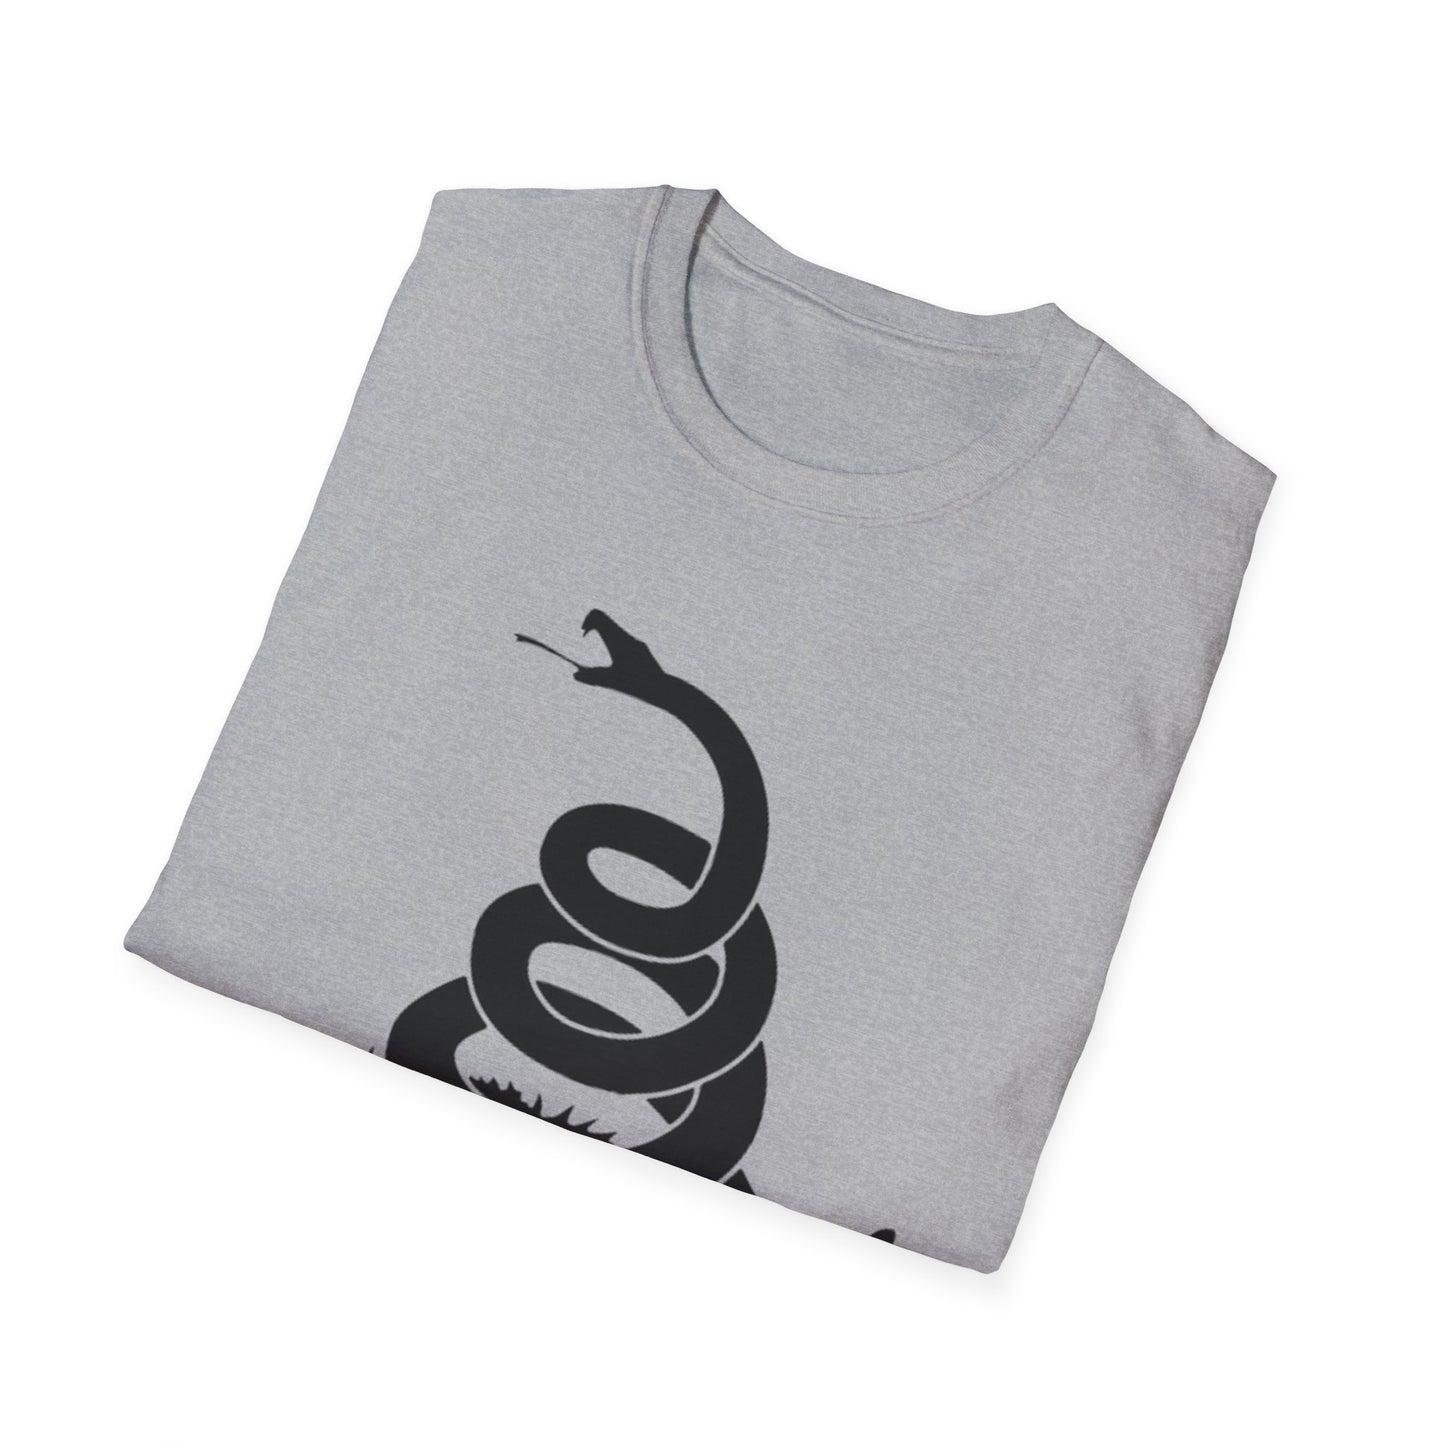 FAFO Dont Thread on Me - Unisex Softstyle T-Shirt